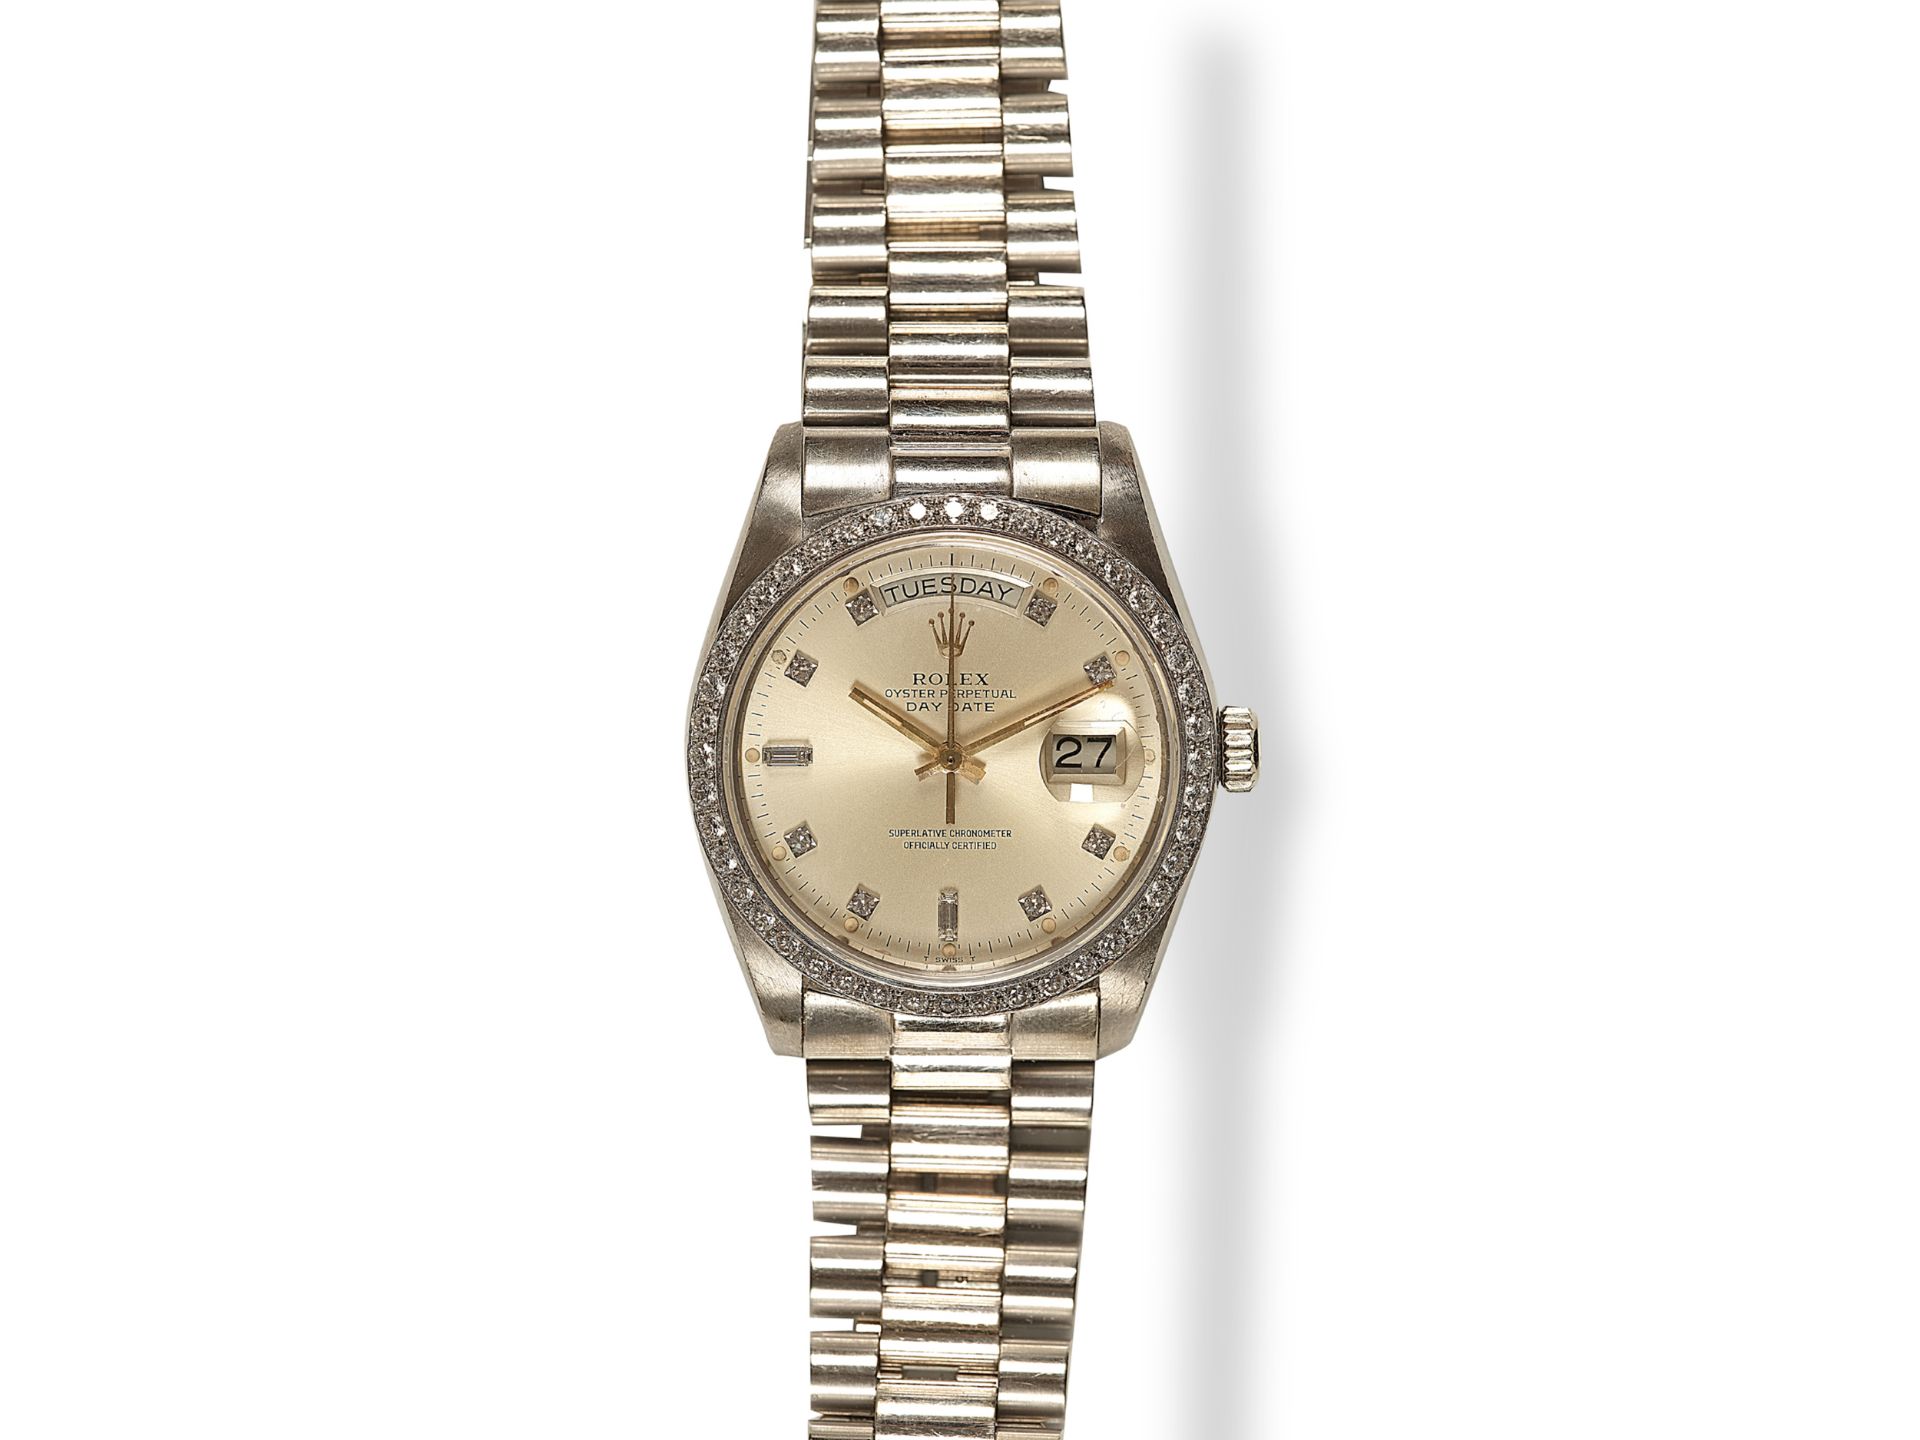 Rolex Oyster Perpetual Day Date, White gold, 18 carat, With diamond bezel